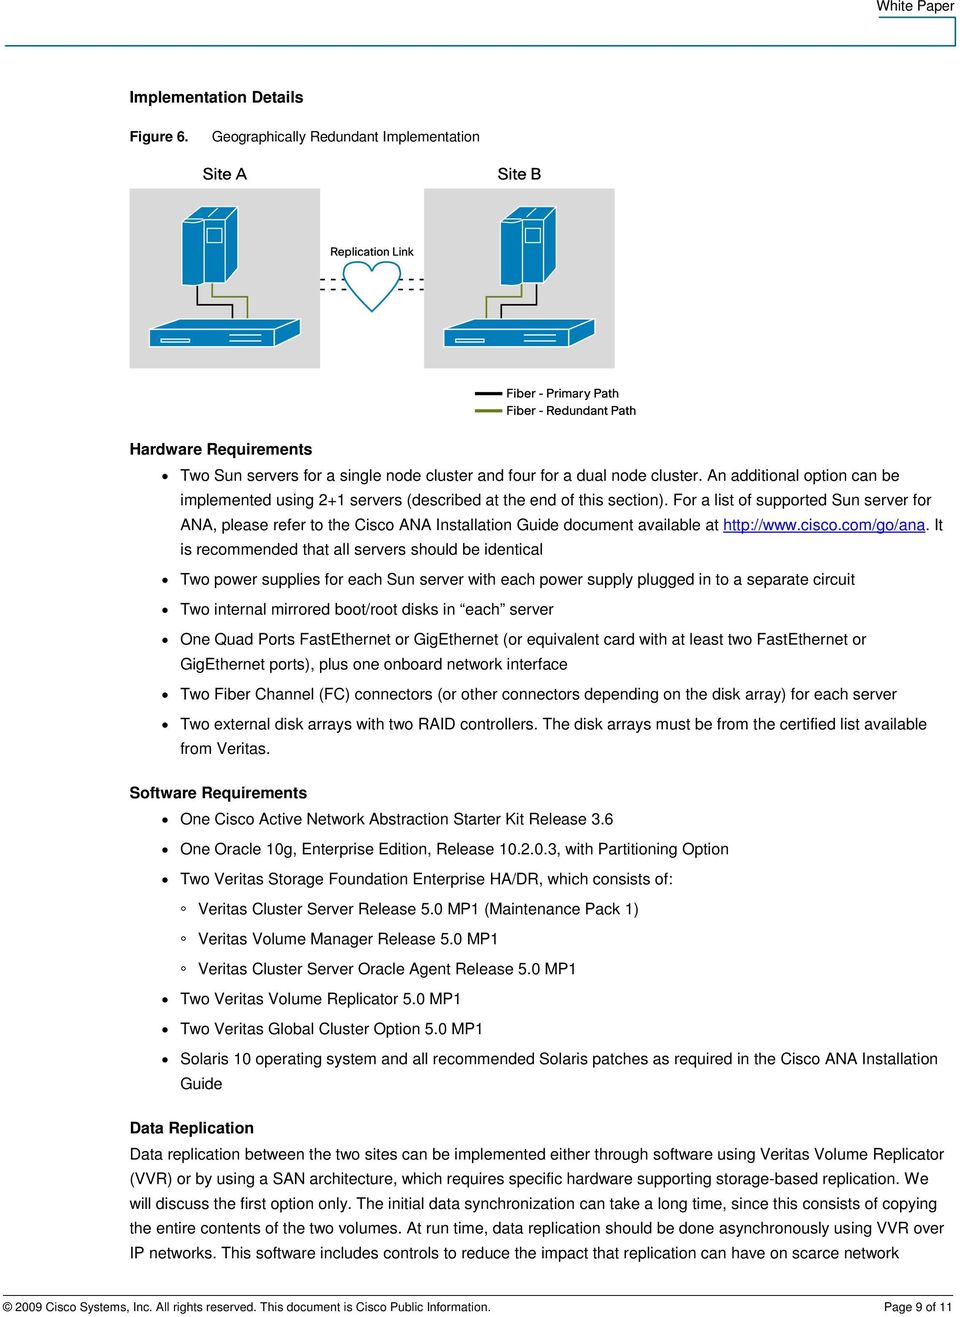 For a list of supported Sun server for ANA, please refer to the Cisco ANA Installation Guide document available at http://www.cisco.com/go/ana.